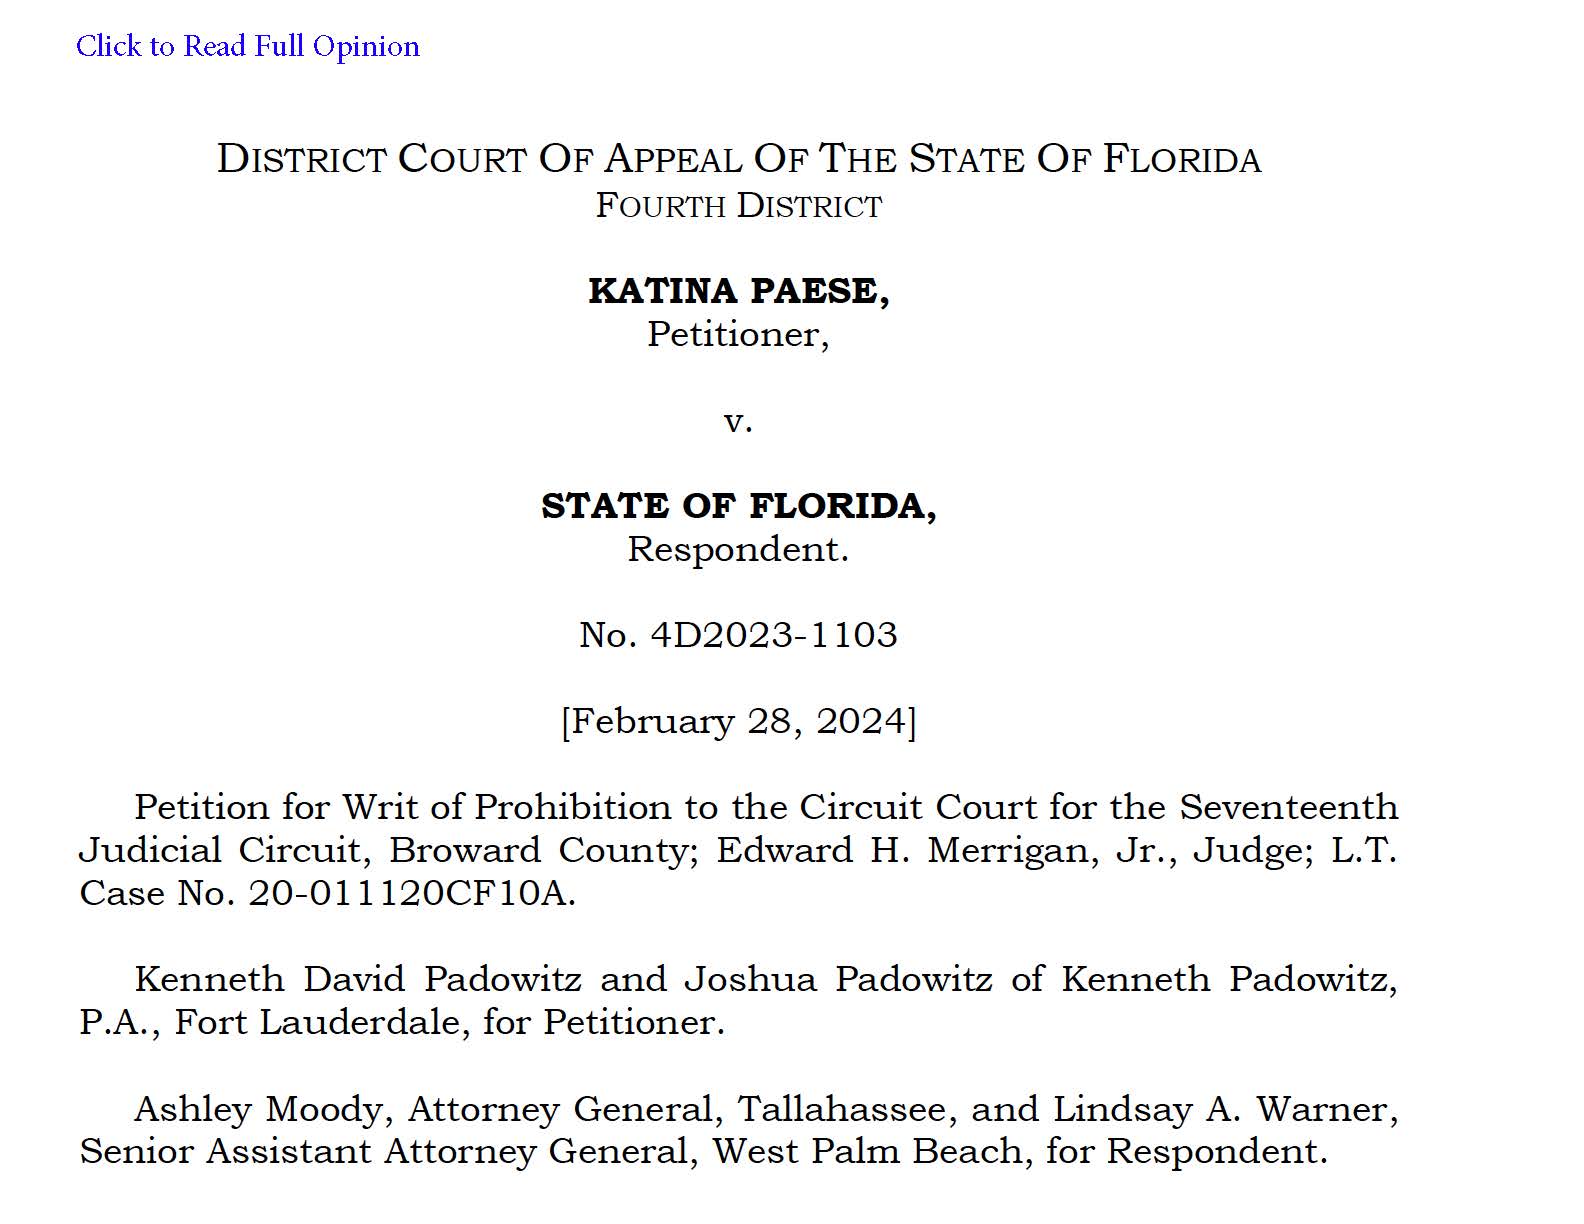 Opinion-Disposition (Style of Case: Katina Paese v. State of Florida) (Stand Your Ground)